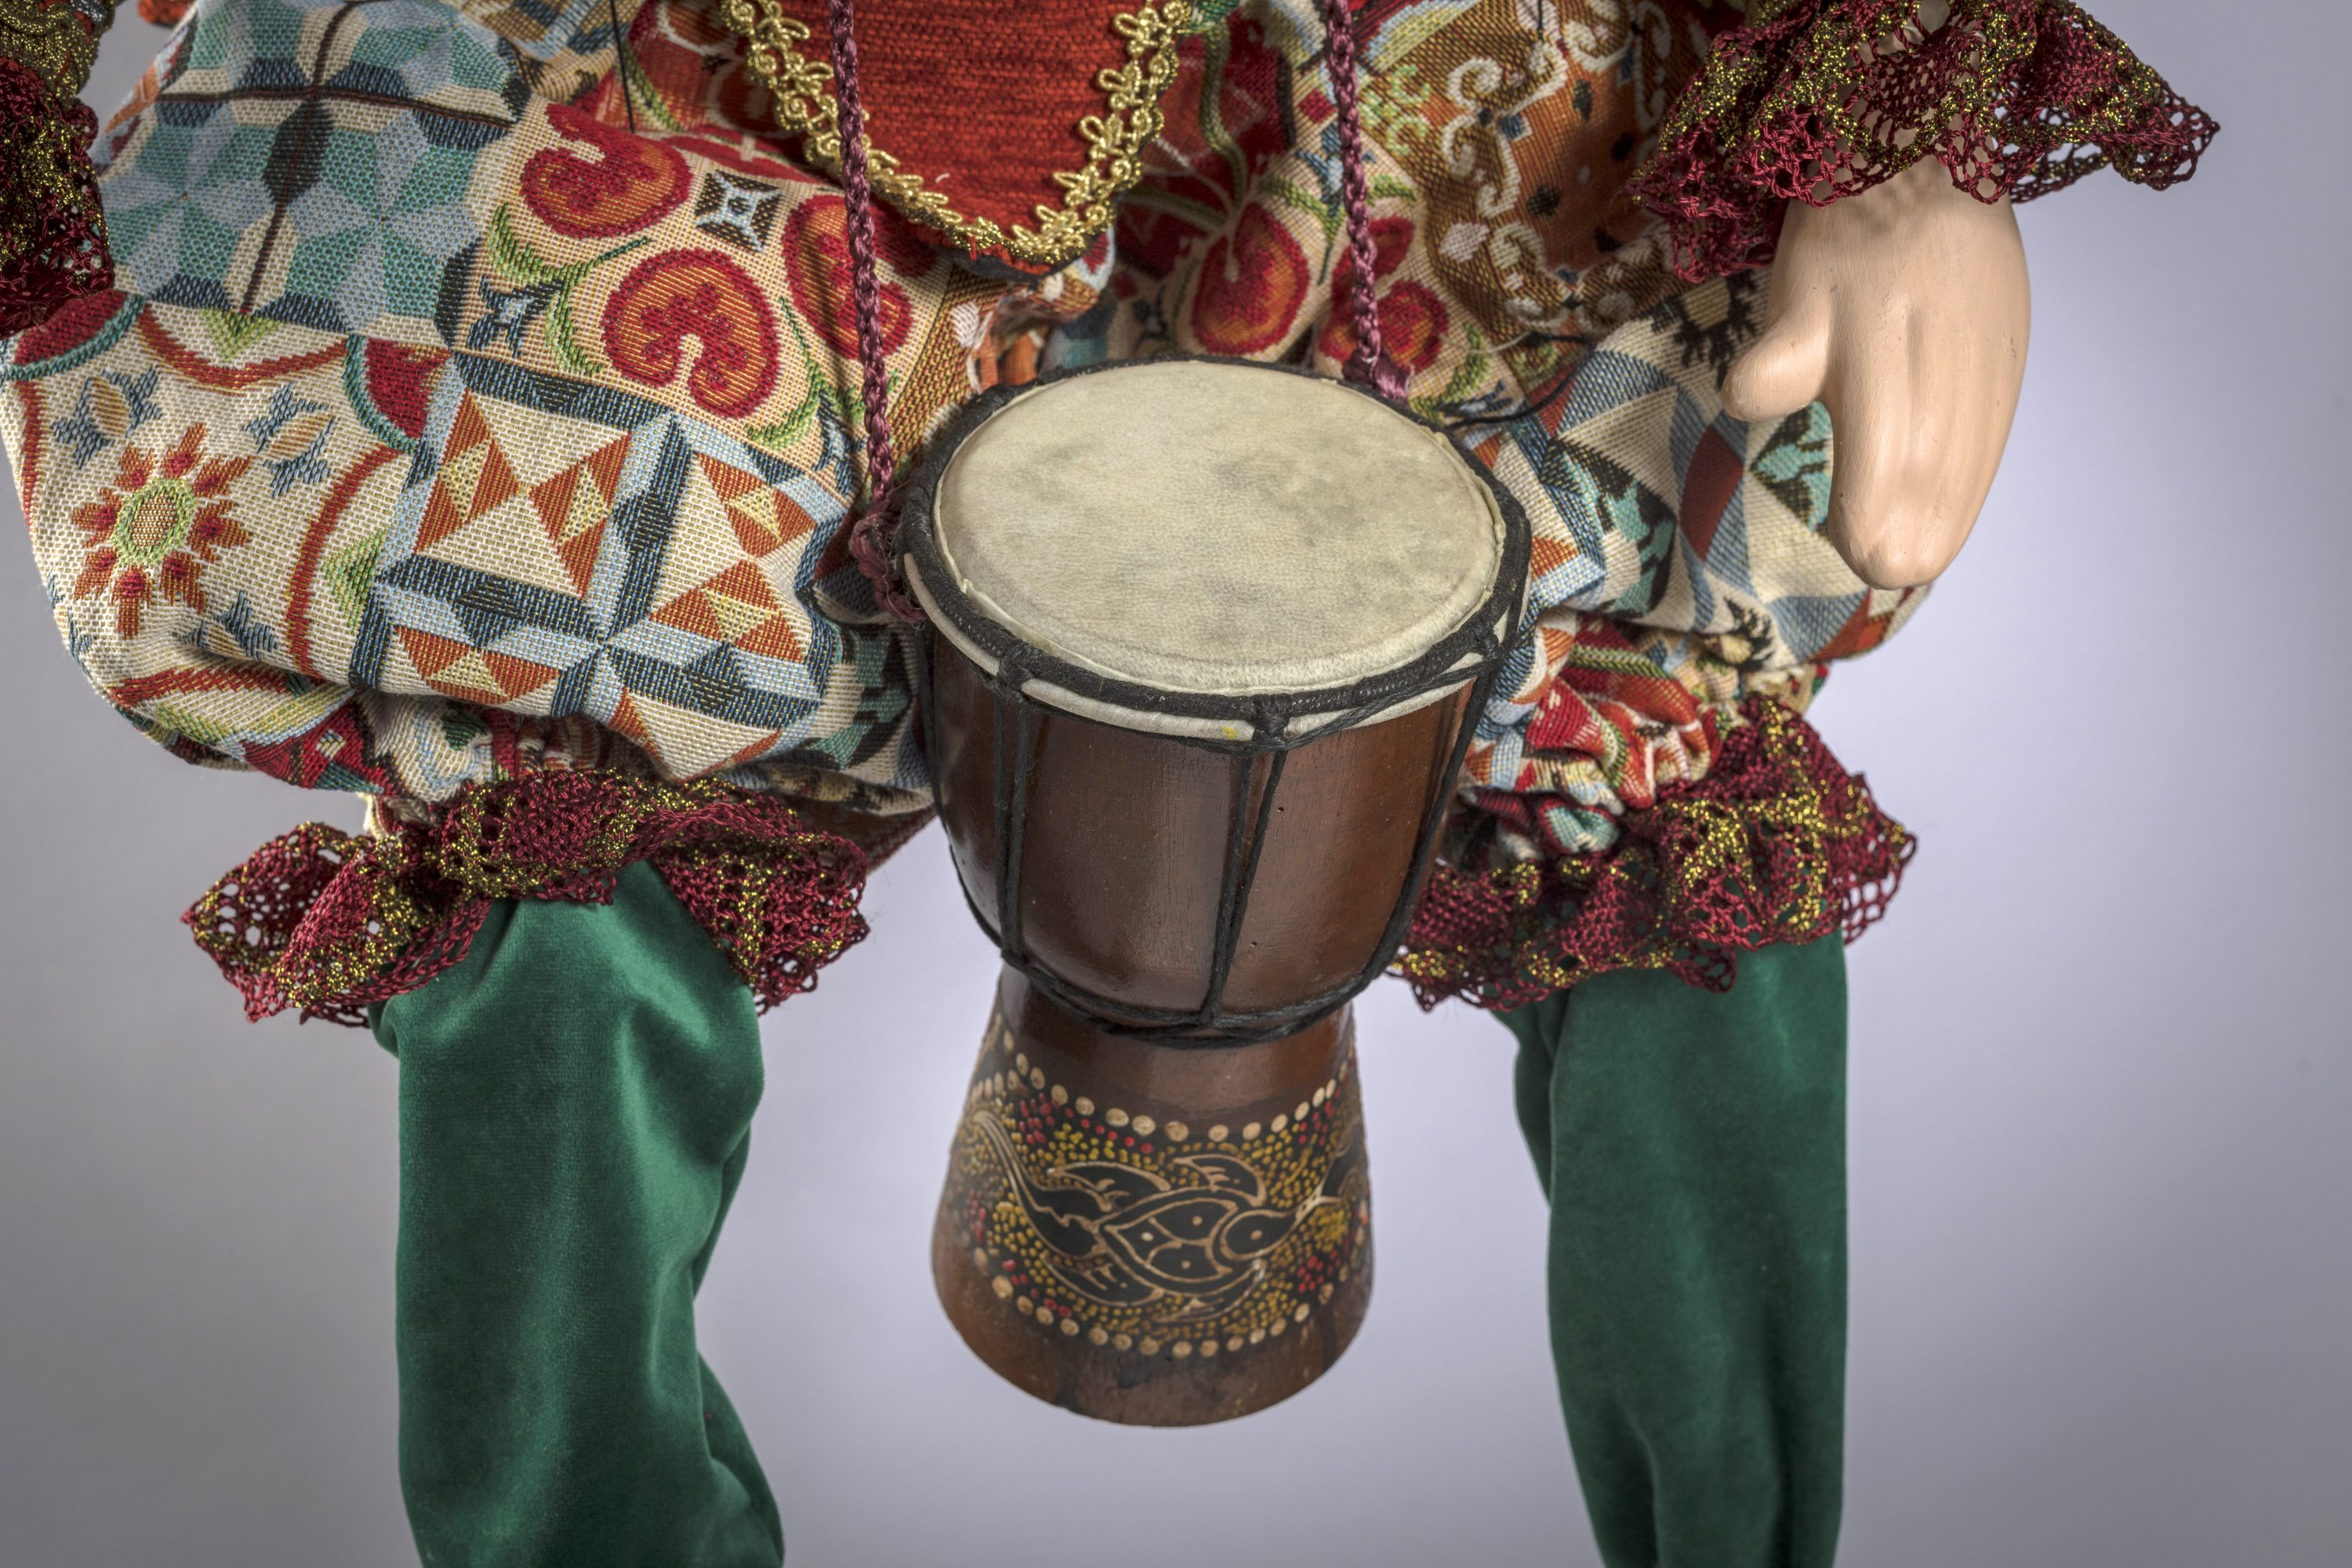 The Drummer is handmade marionette by Vasiliki Savvani She uses different fabrics every detail is hand-sewn, face, hands and feets made by ceramic. His face is hand painted by acrilyc paints.